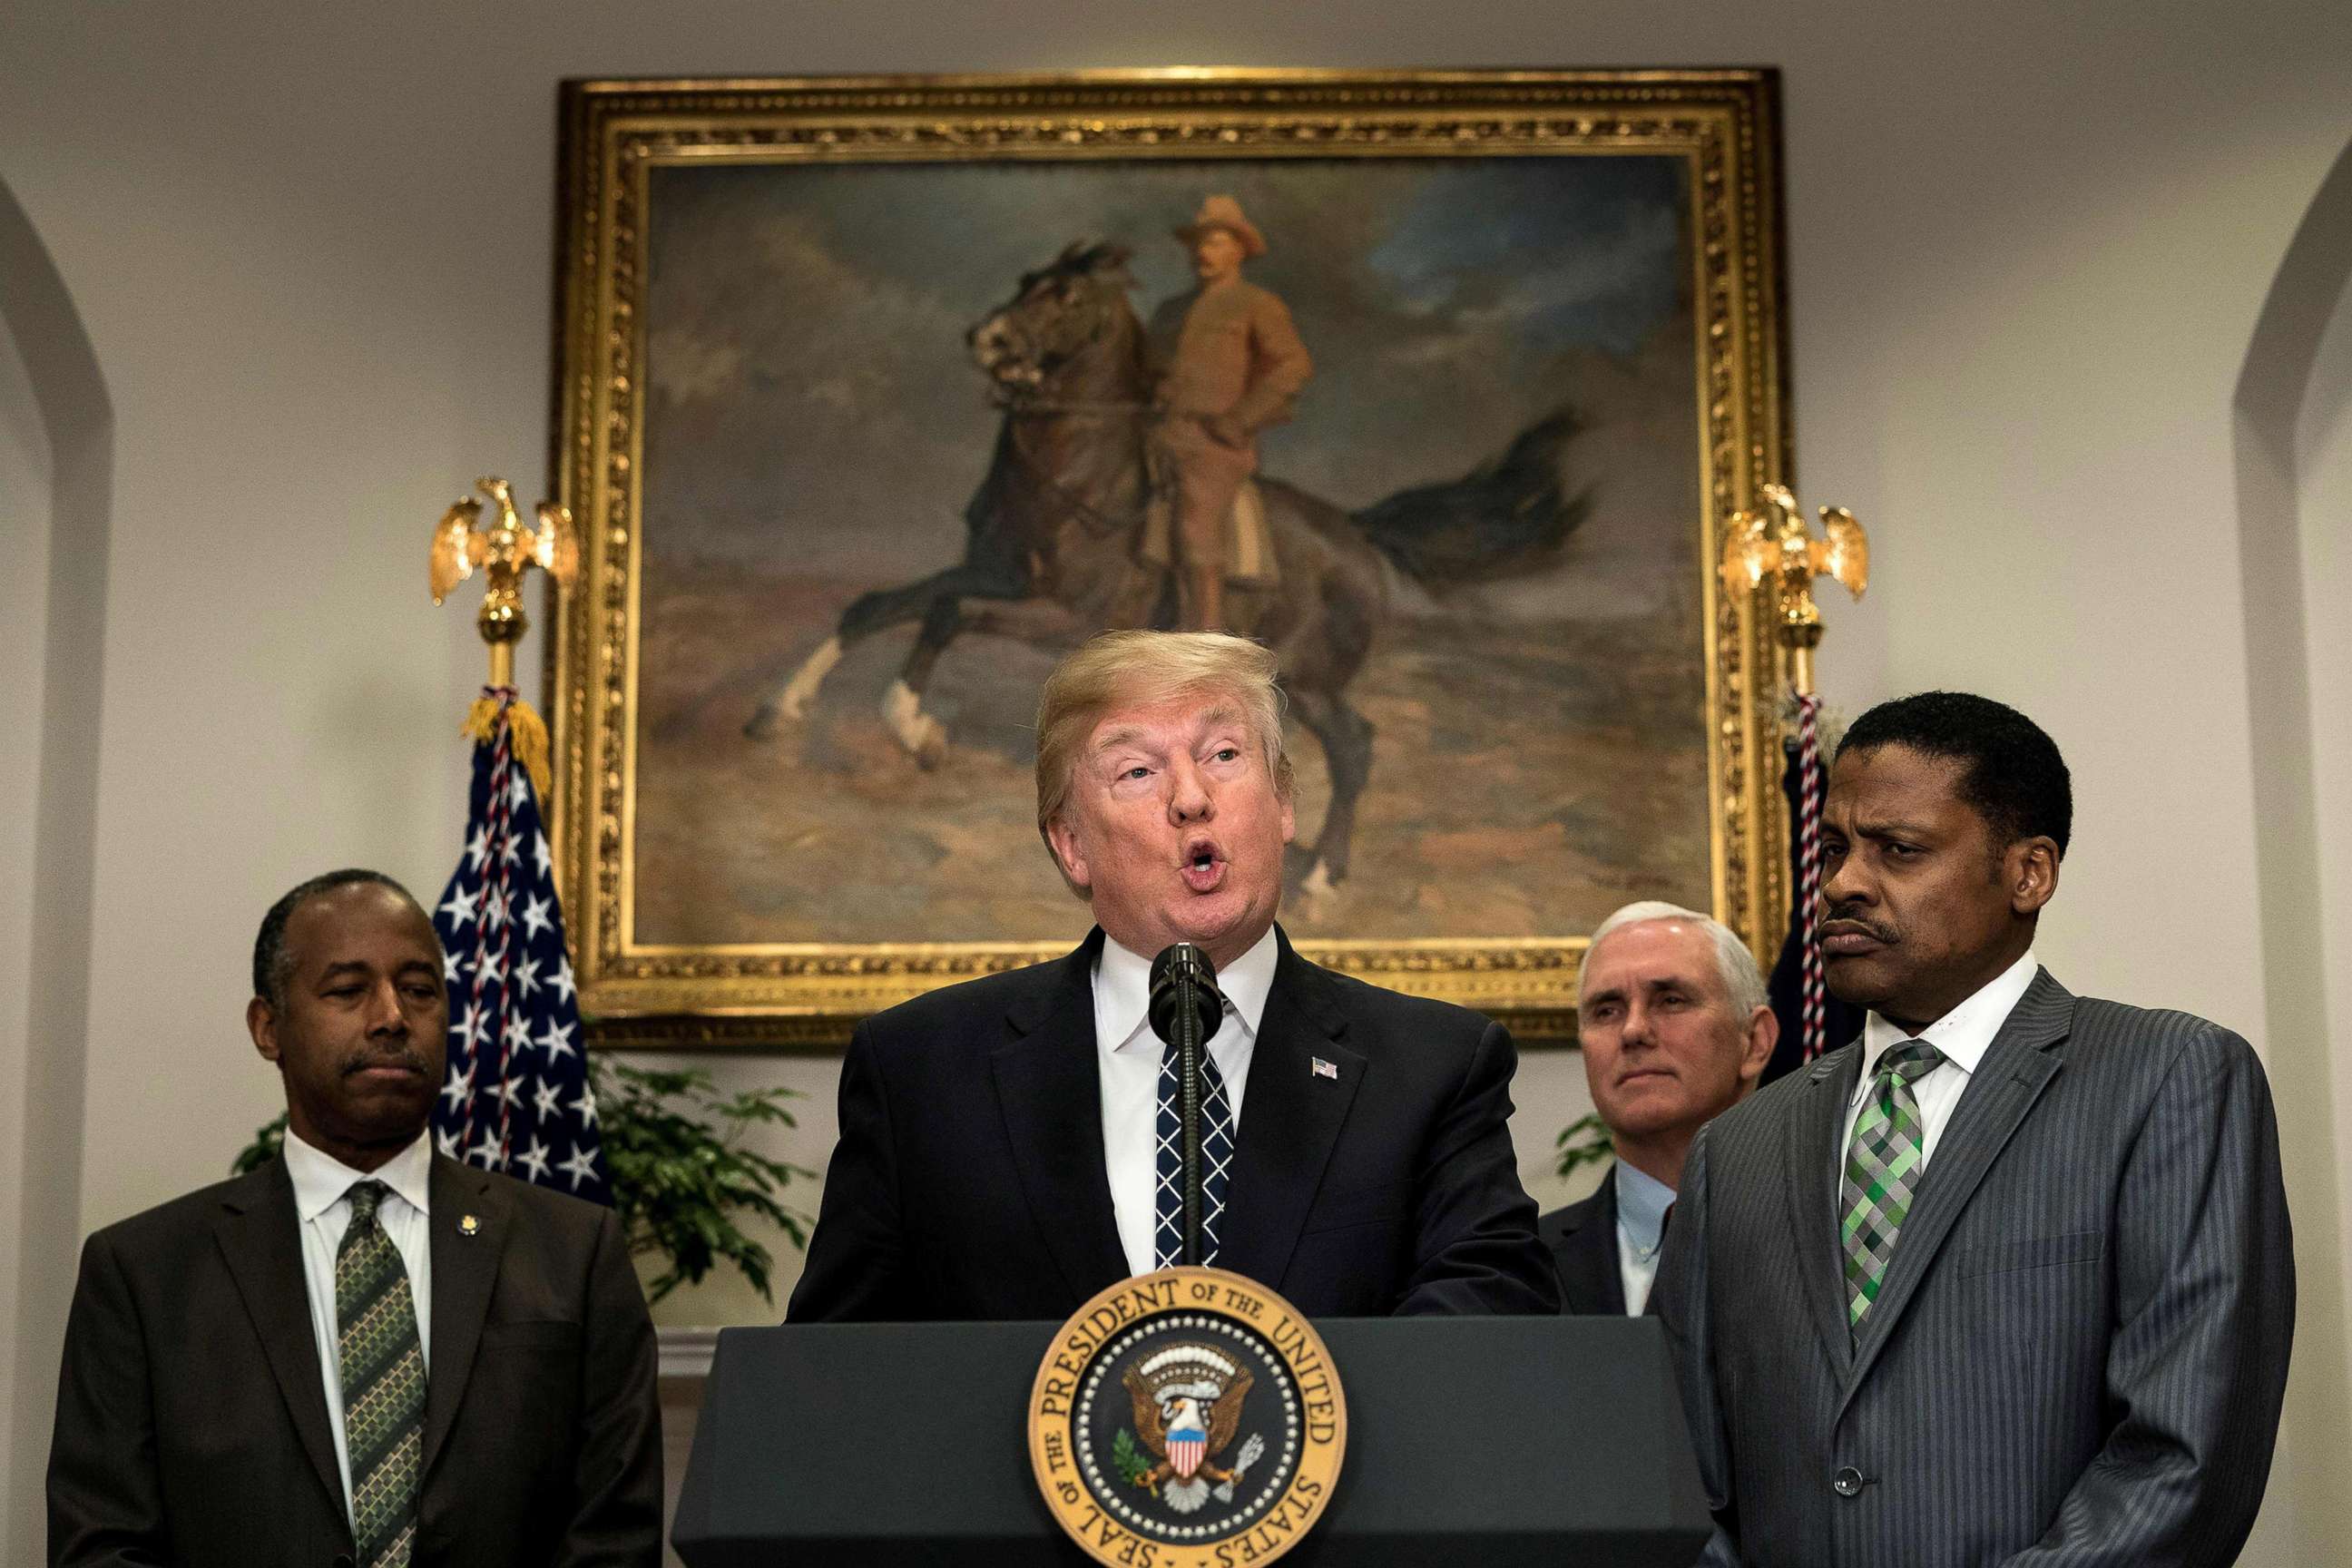 PHOTO: Secretary of Housing and Urban Development Ben Carson, Vice President Mike Pence and Isaac Newton Farris Jr. listen while President Donald Trump speaks about Martin Luther King Jr. in the White House Jan. 12, 2018 in Washington.